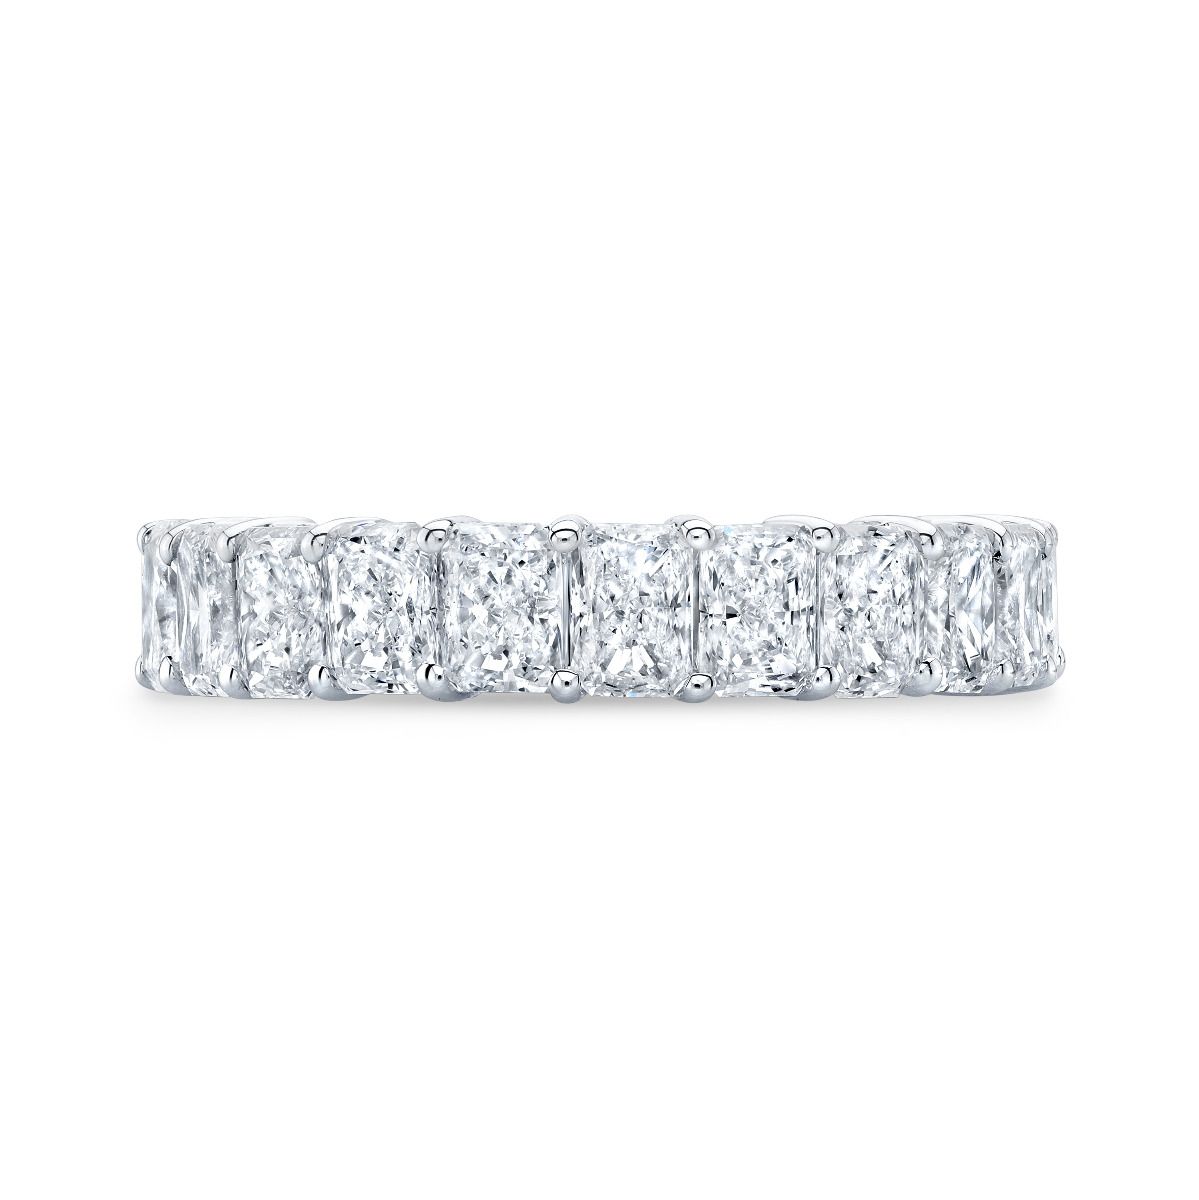 5 Carat Radiant eternity ring in front profile